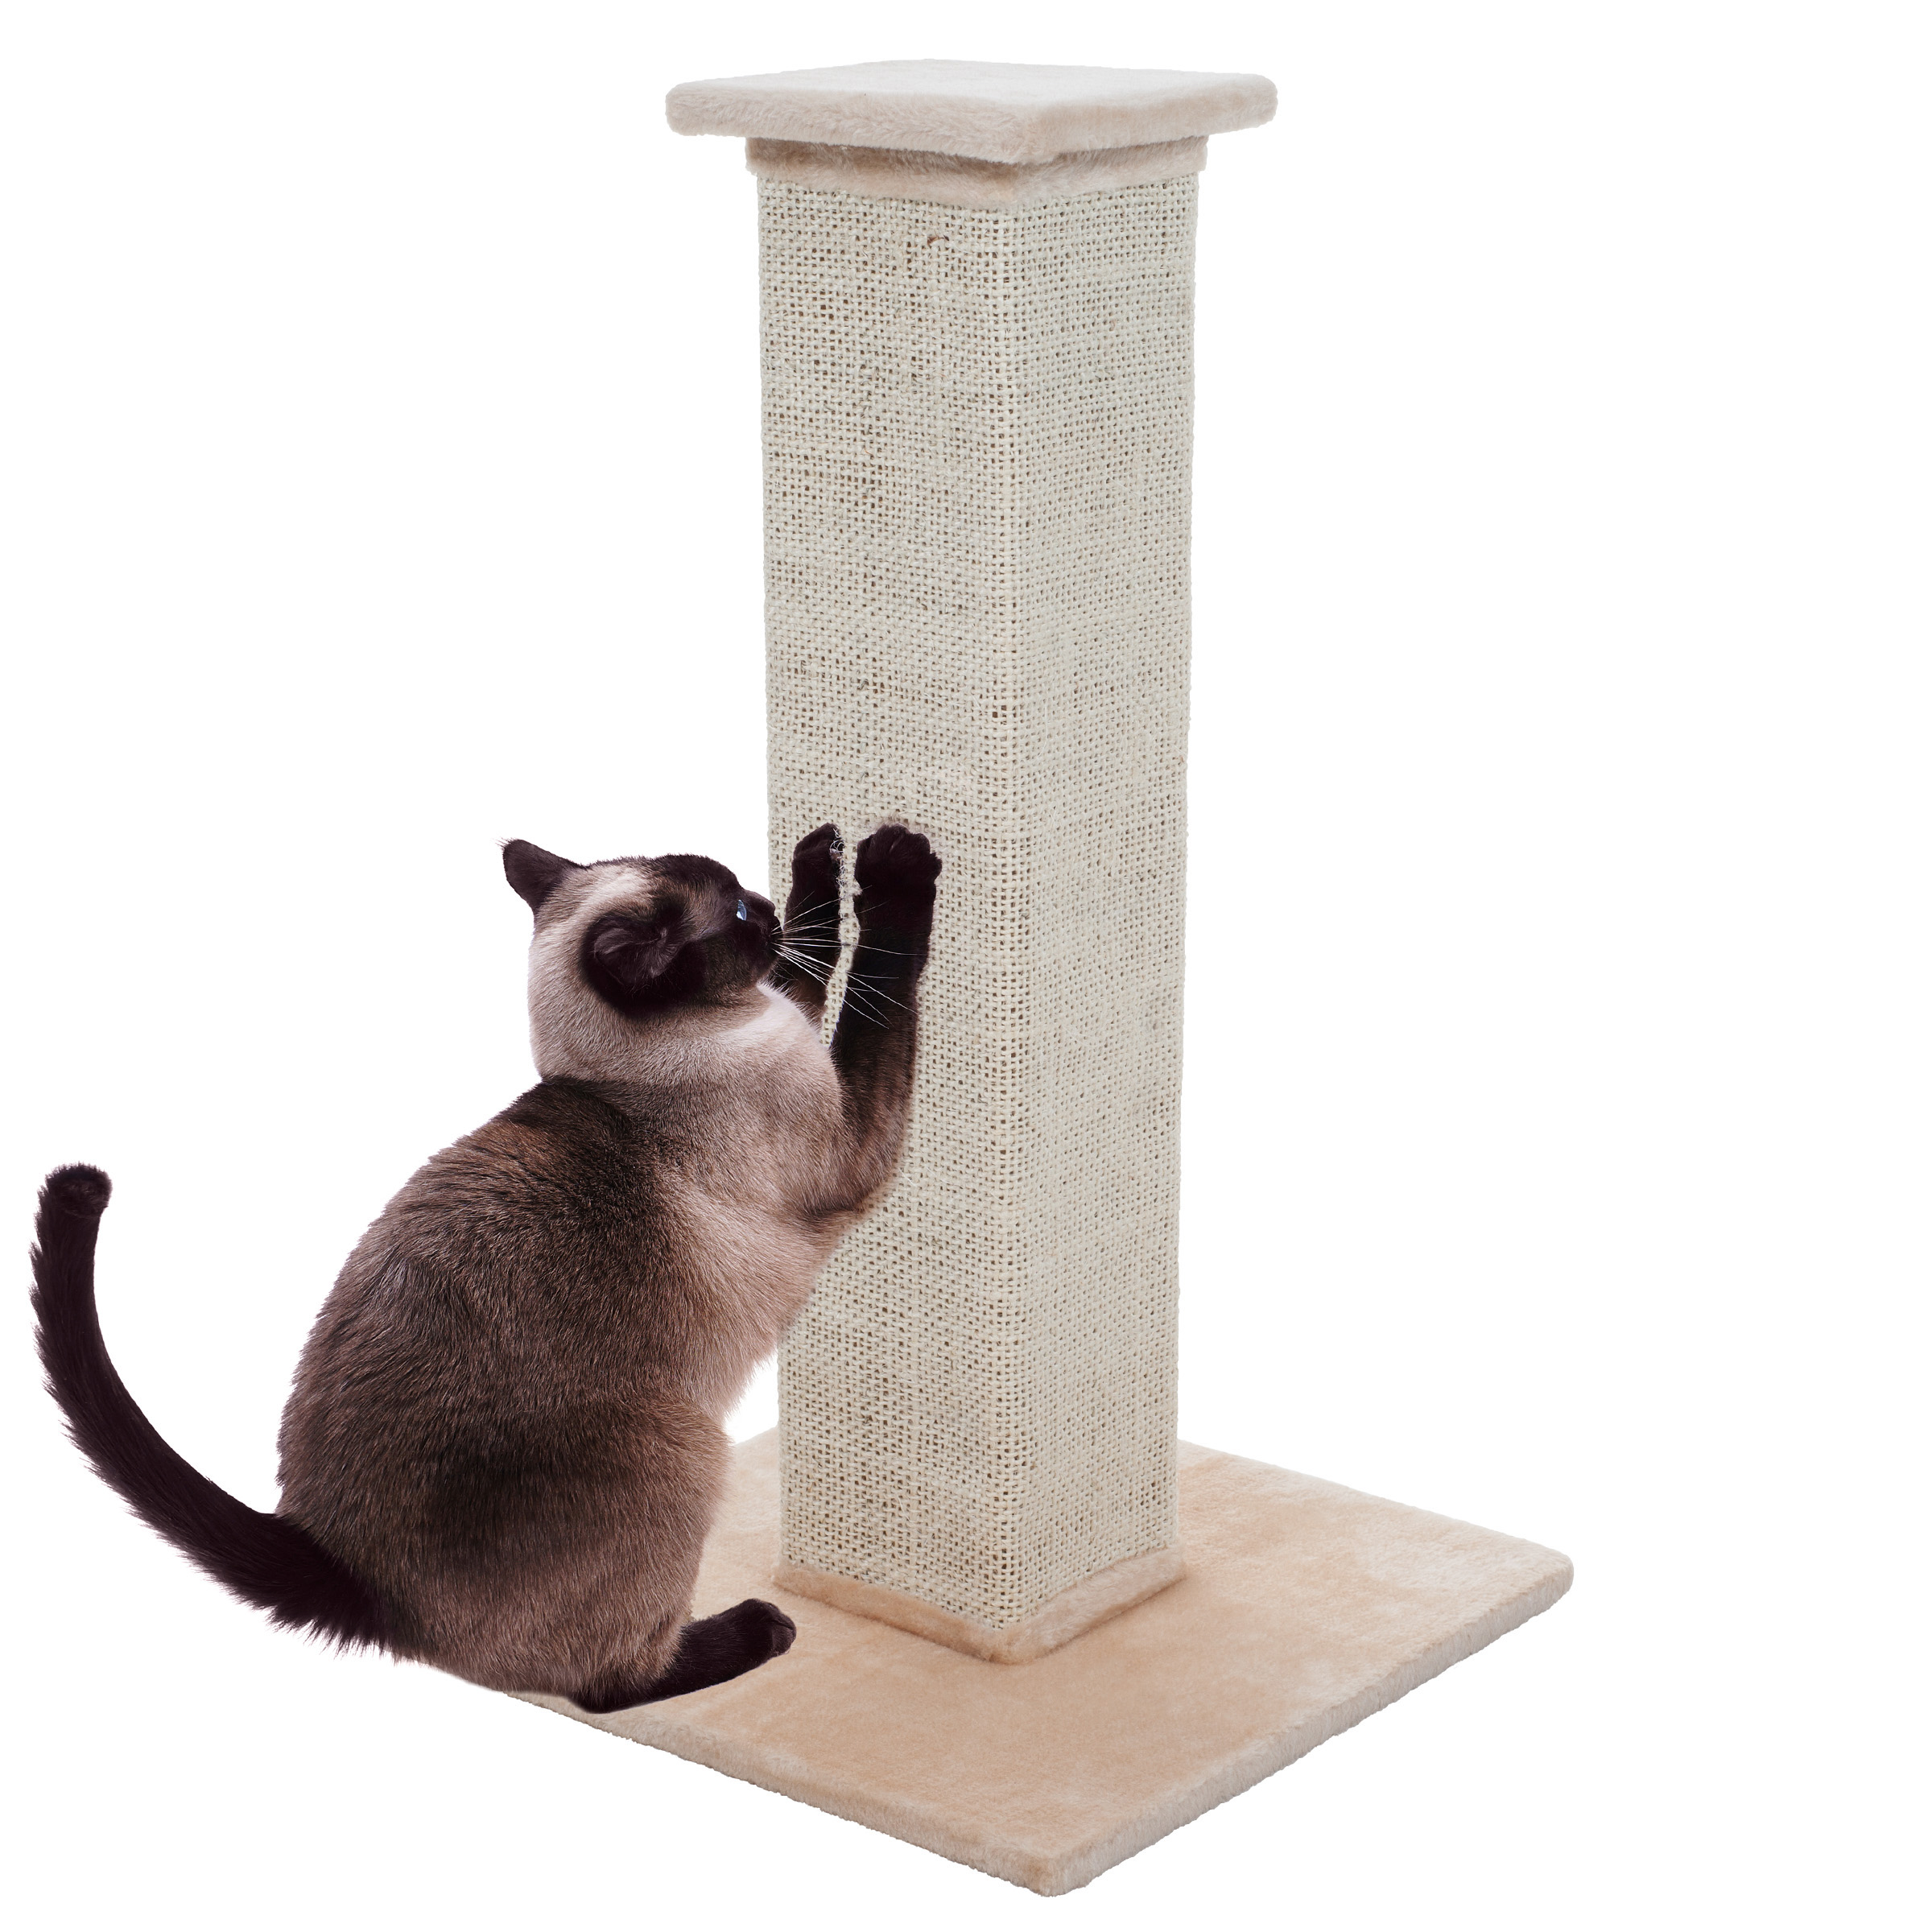 Indoor Cat Scratching Post with Carpeted Base - 27.75-Inch Beige Sisal Burlap Fabric by PETMAKER - image 1 of 7